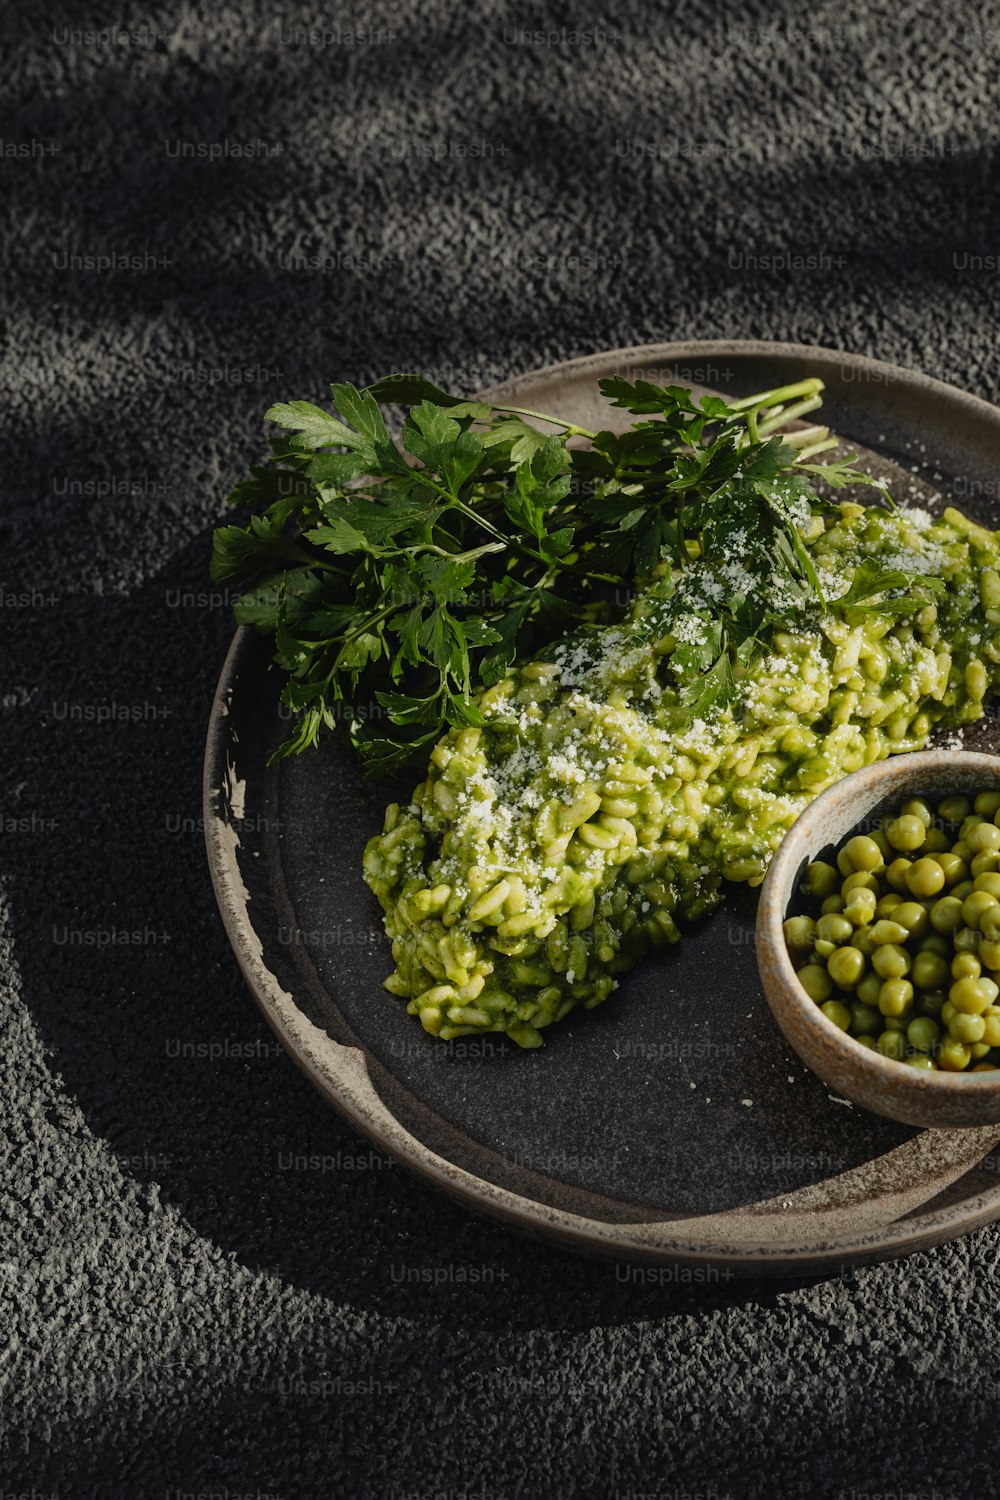 a plate of food with peas and parsley